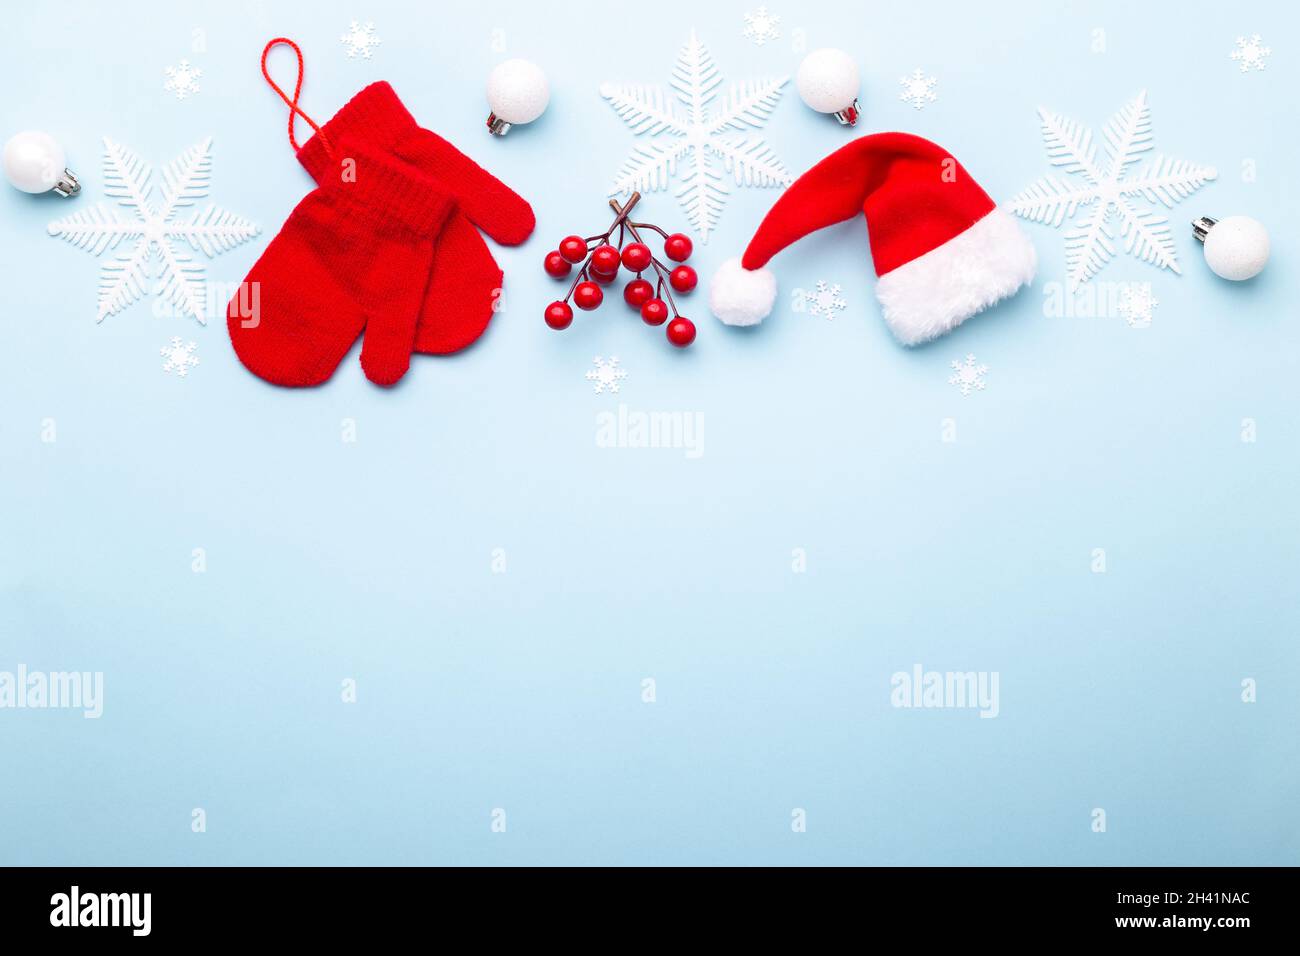 Red Christmas or New year ornaments Stock Photo